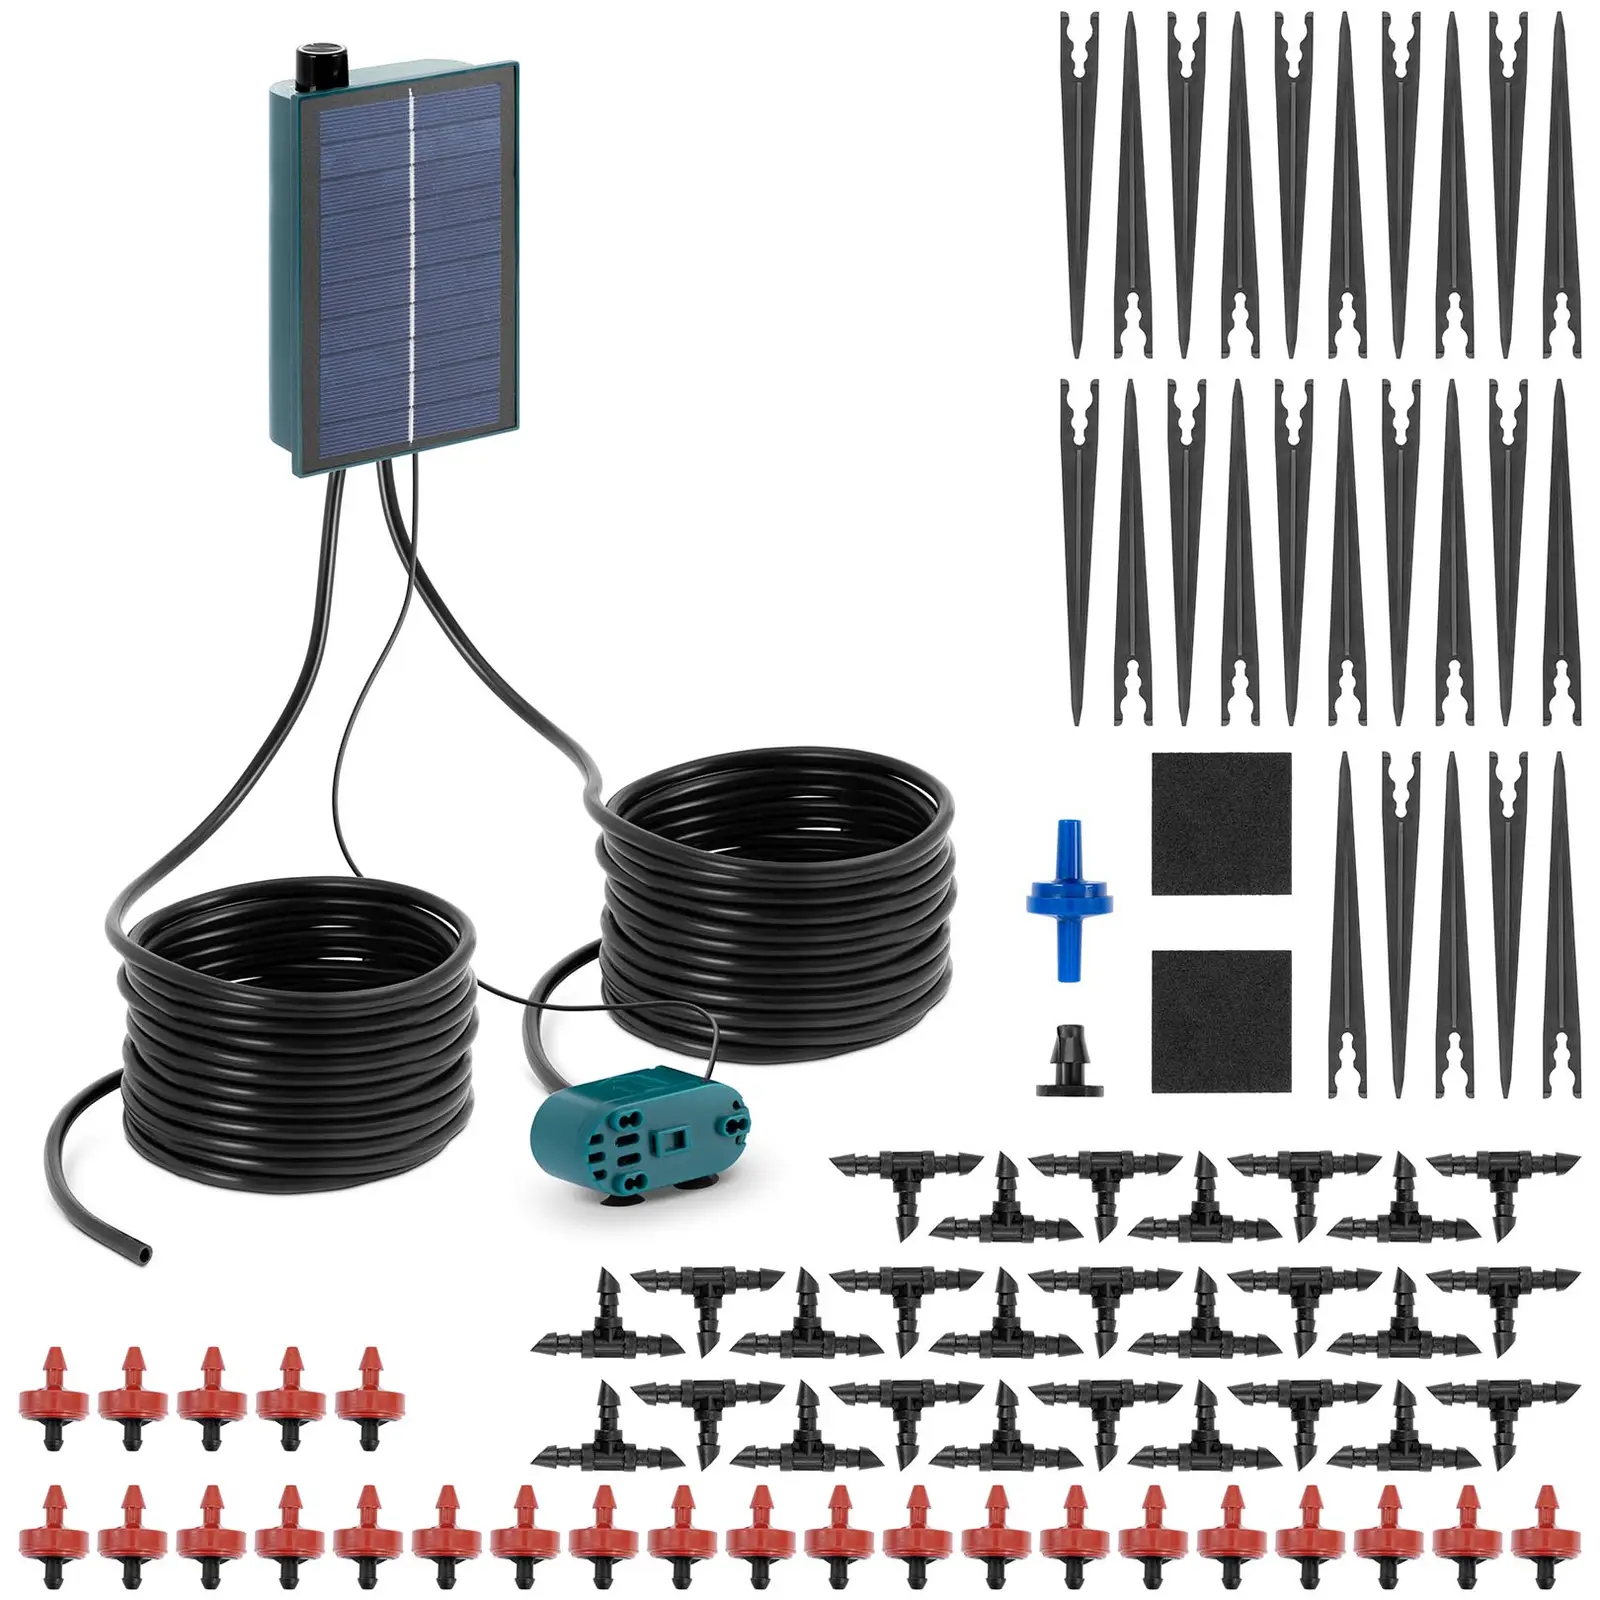 Solar irrigation system - {{number_of_sections}} Dripper - 5 m hose